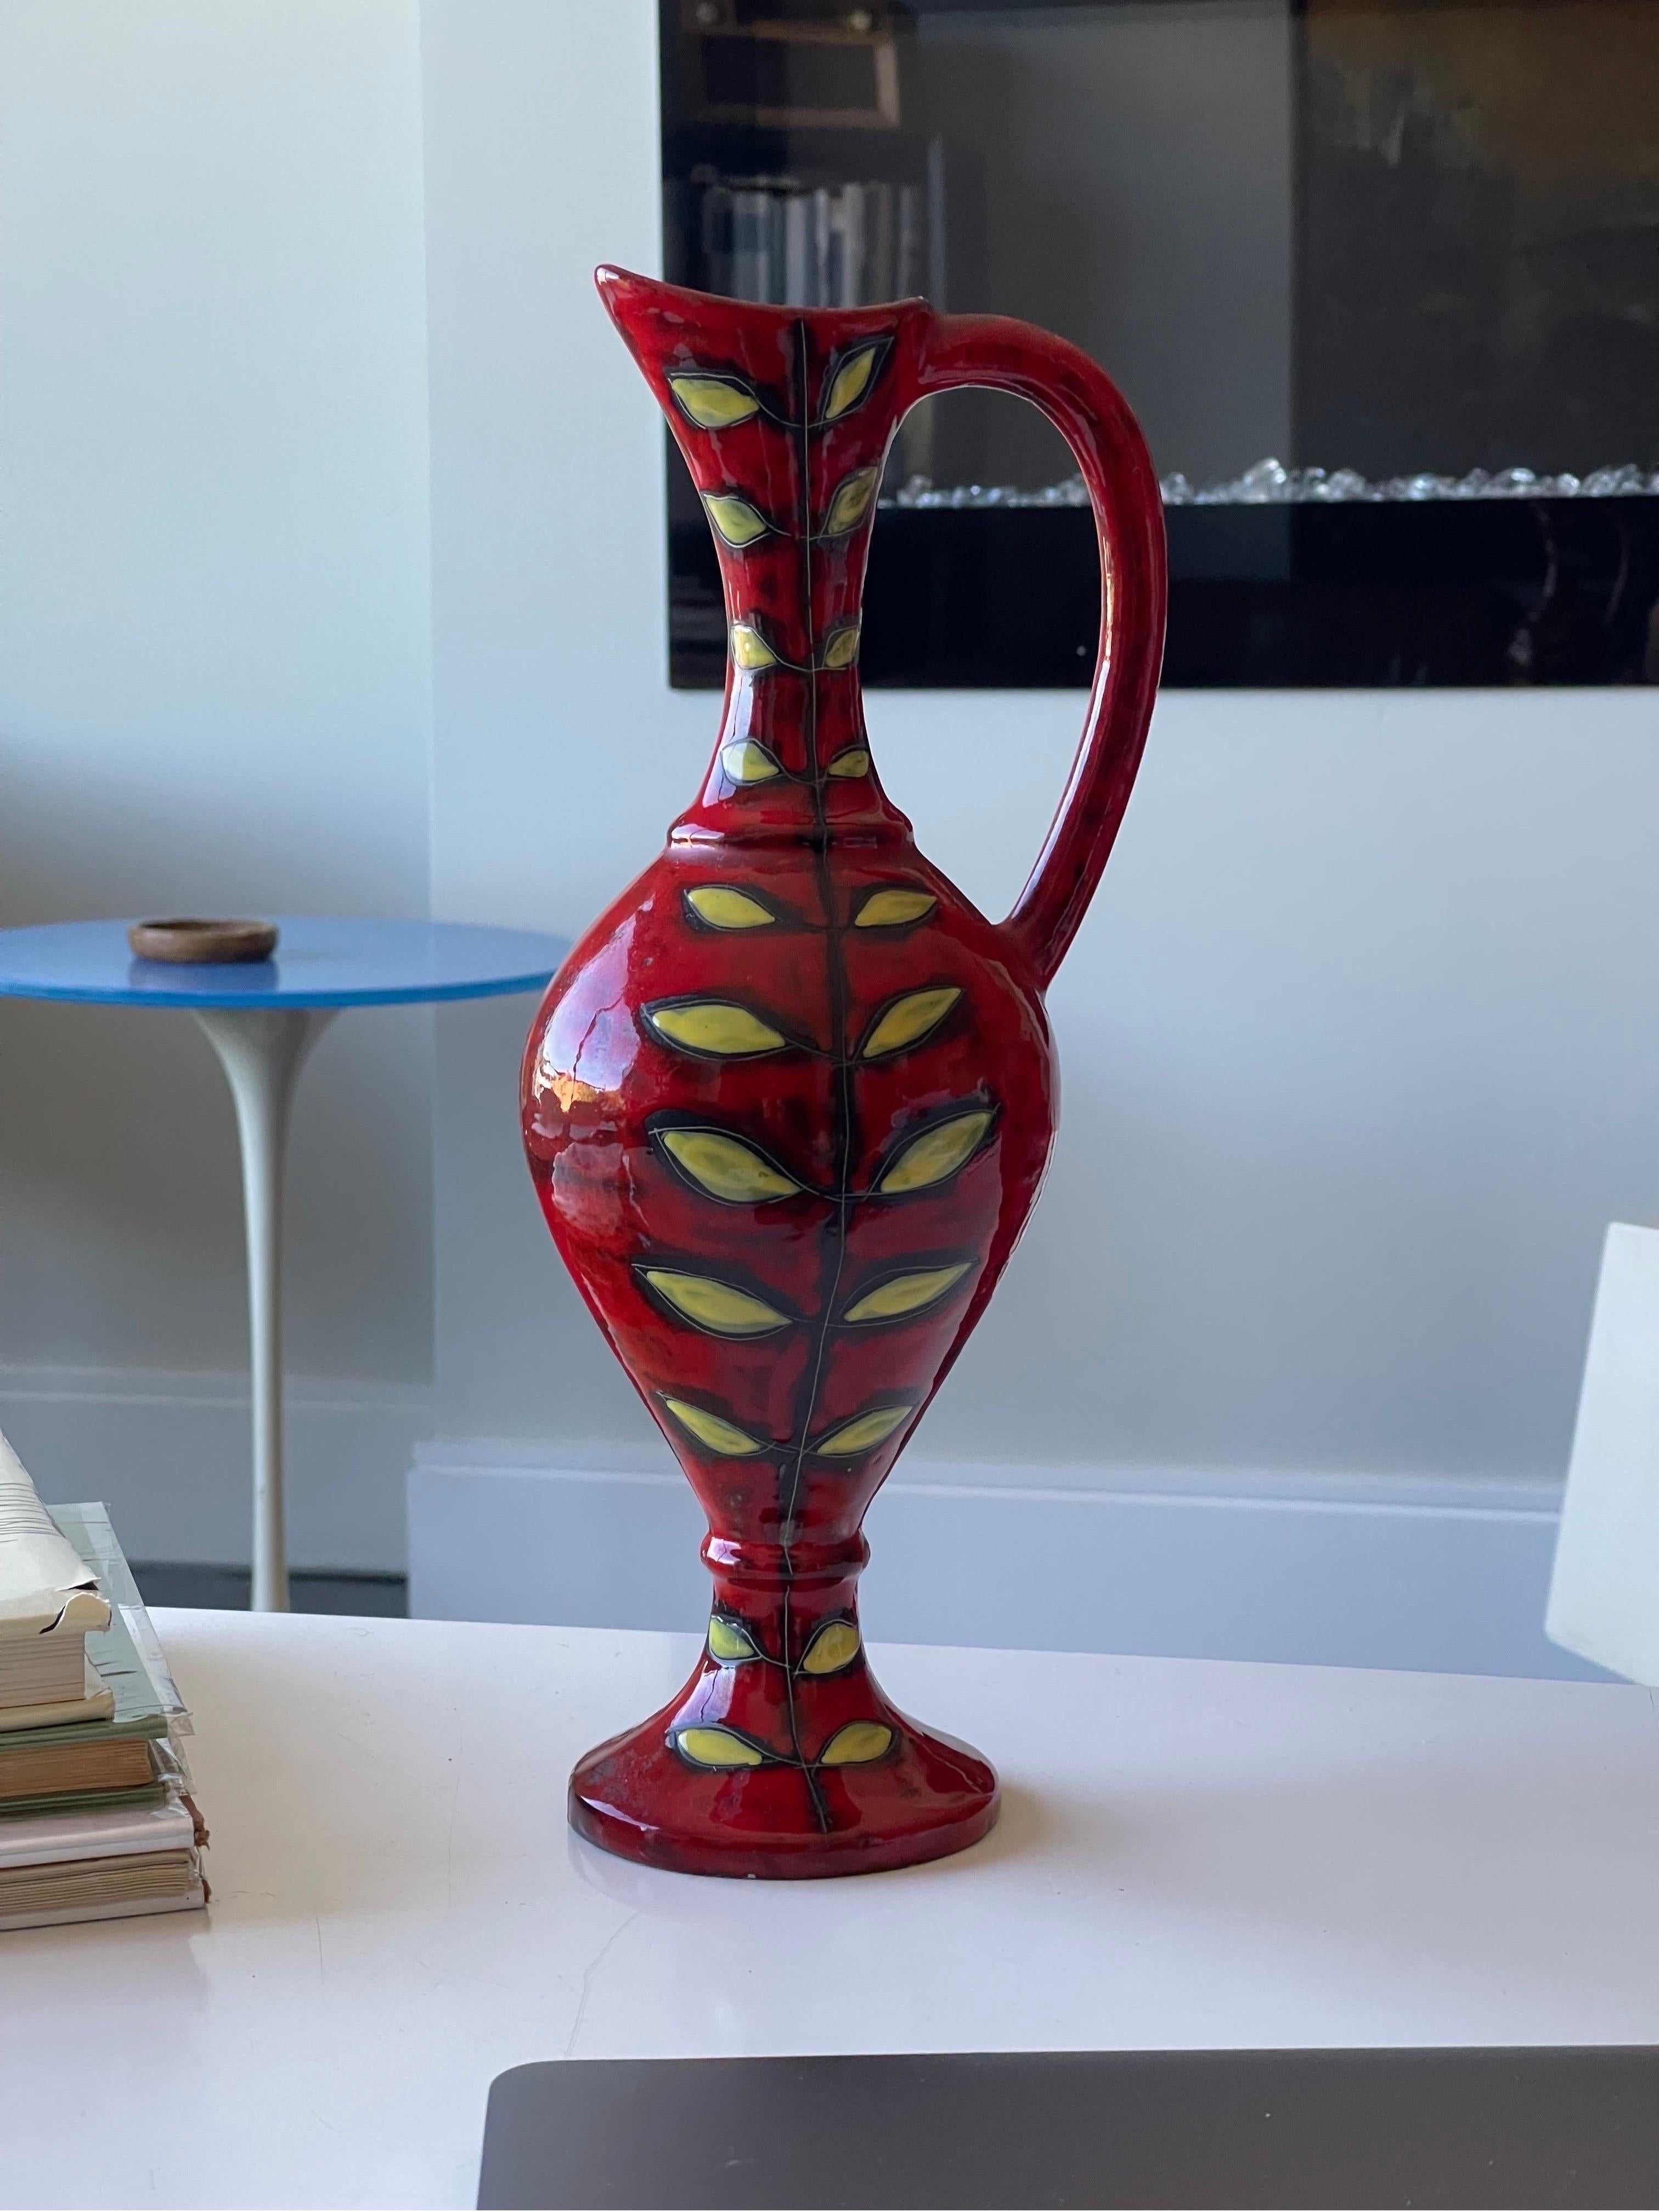 Exquisite Italian Ceramic Vase or Pitcher by Fantoni for Raymor For Sale 3